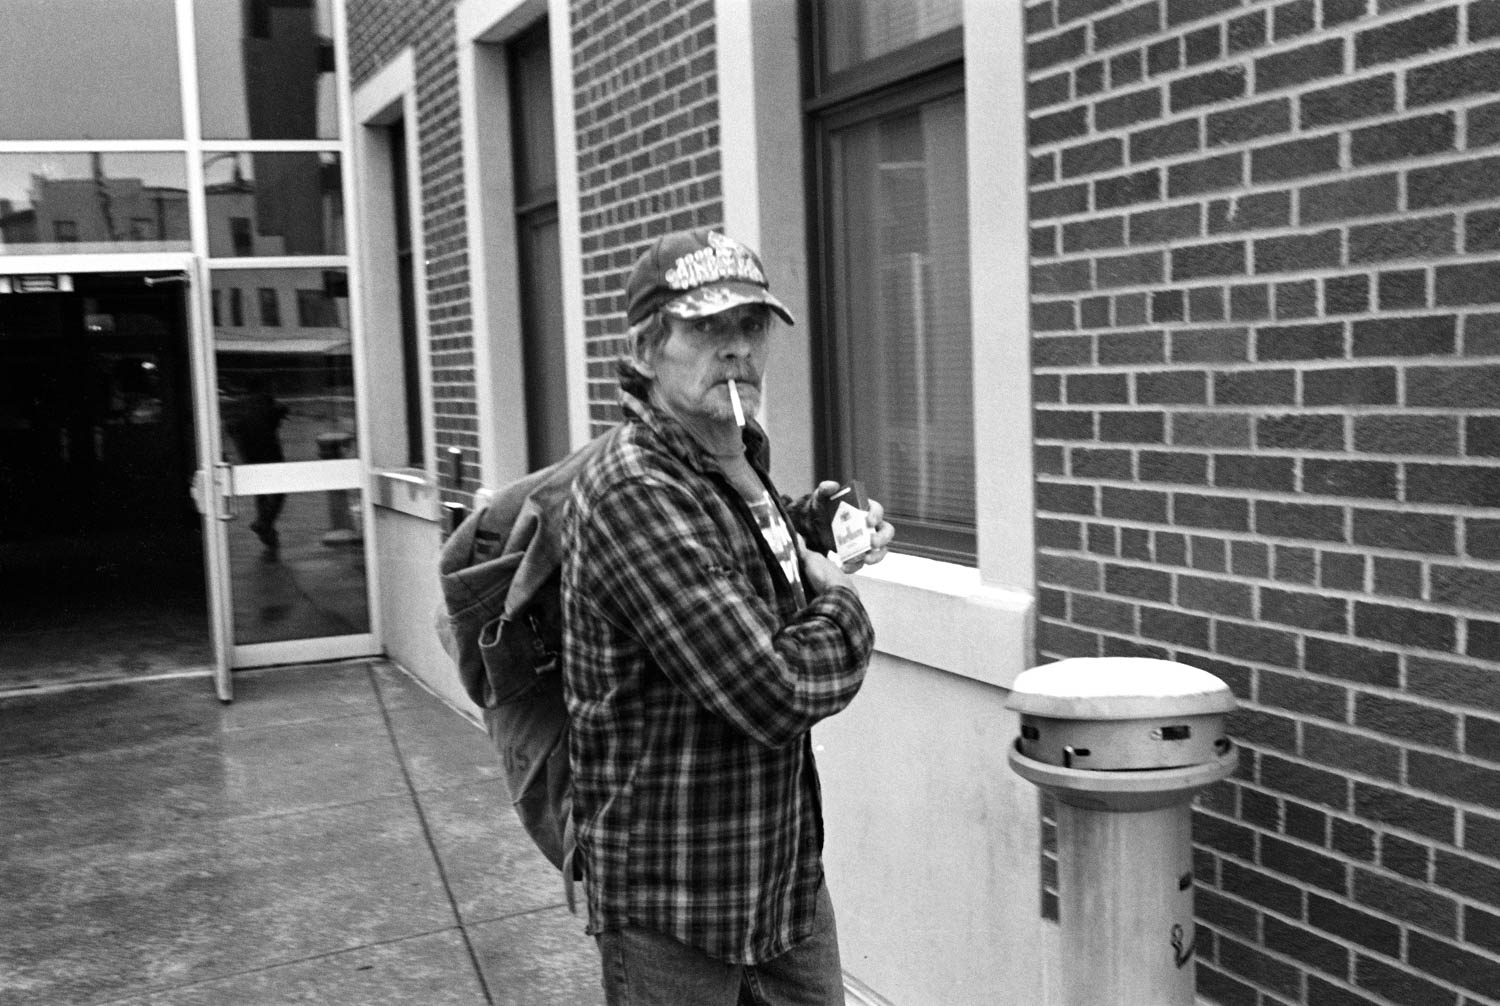 A black and white picture of a man putting a carton of cigarettes back into a flannel shirt pocket while walking out of the B.C. Junction in Binghamton, NY.